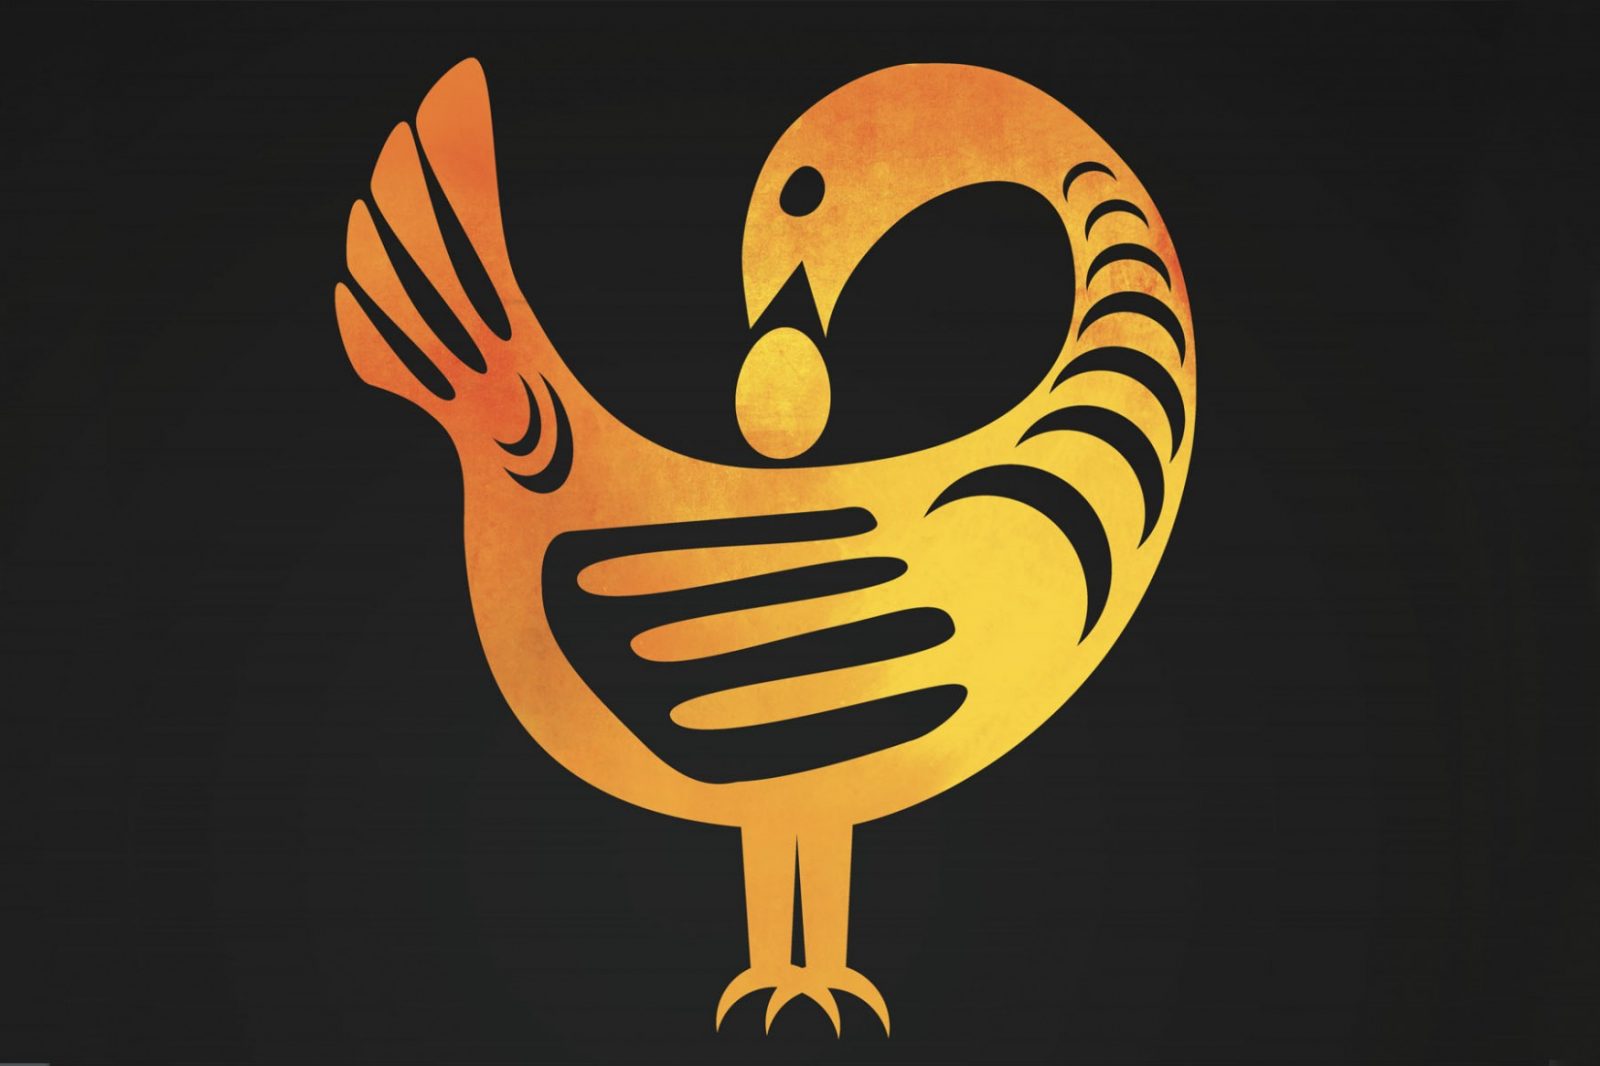 Sankofa bird reflects graphic for Black History Month 2020